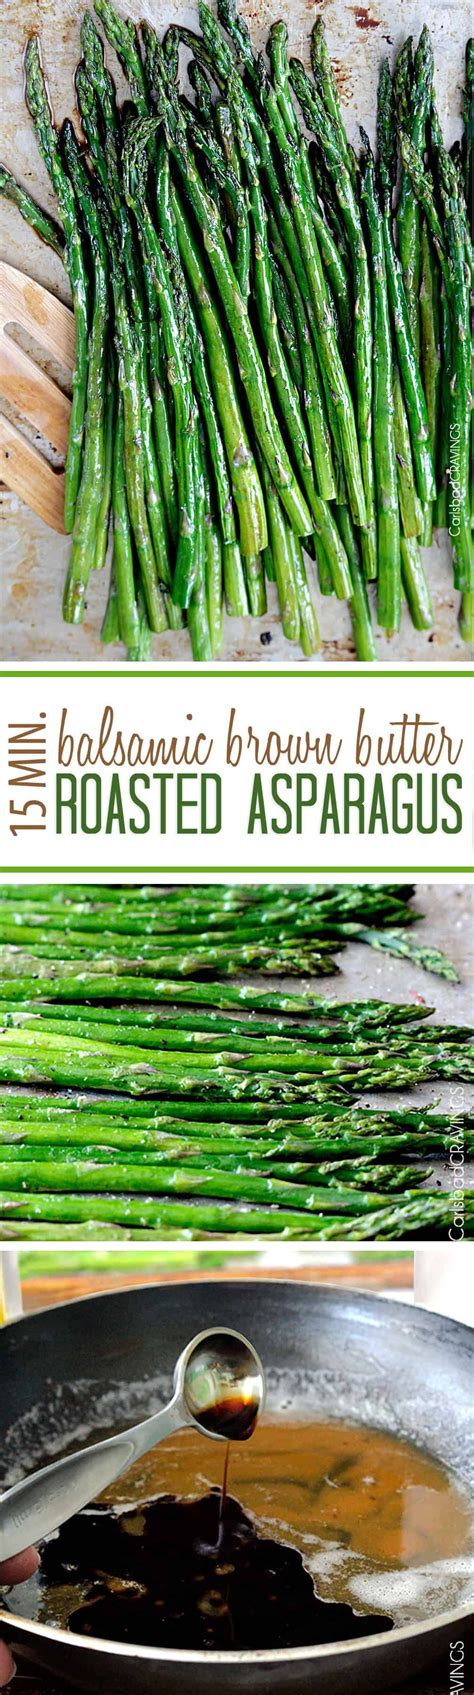 15 Minute Roasted Asparagus With Balsamic Brown Butter Will Blow Your